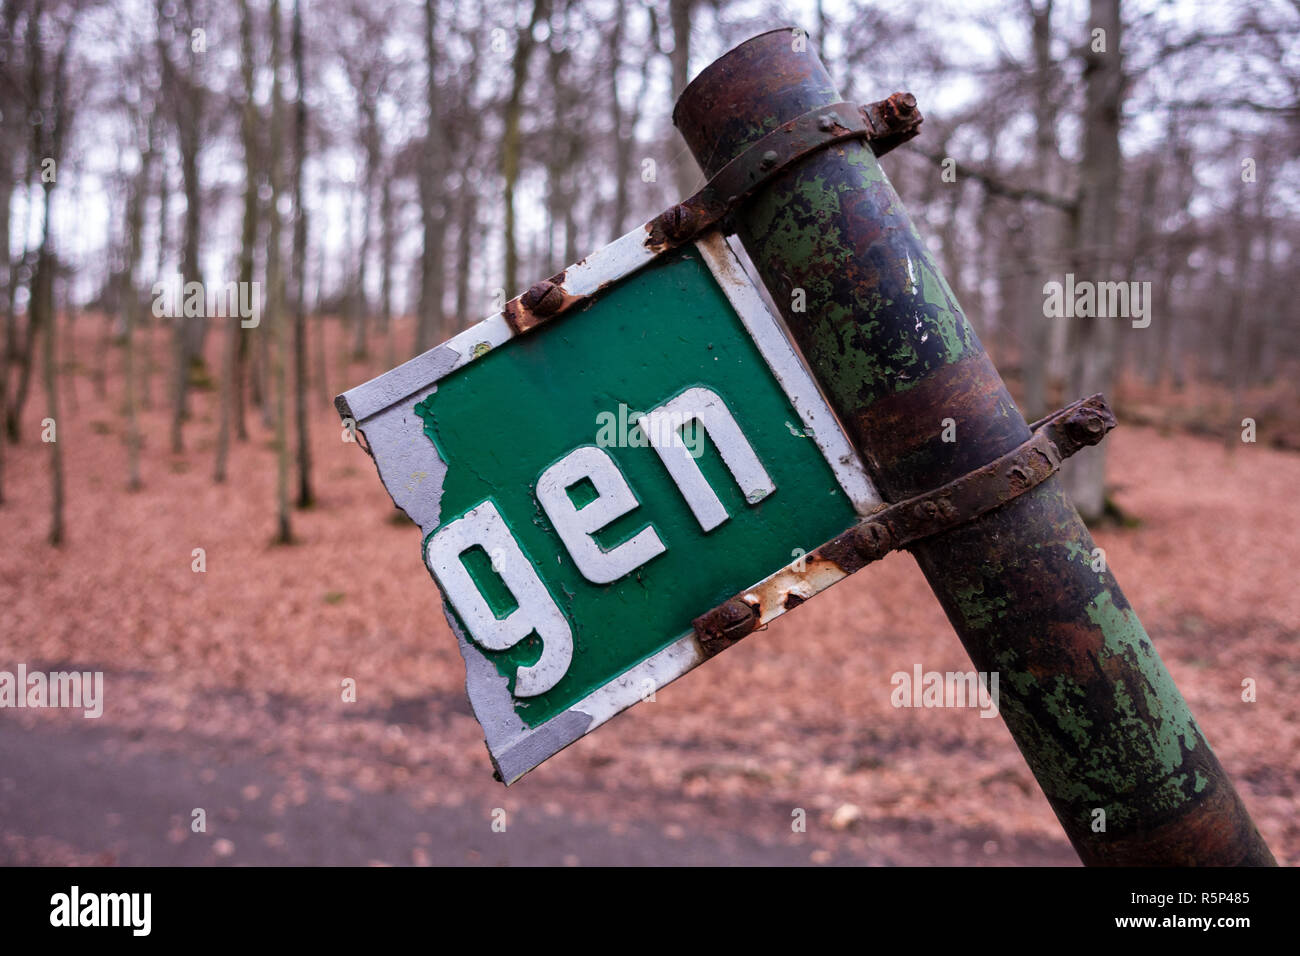 Broken and leaning rusty street sign Stock Photo